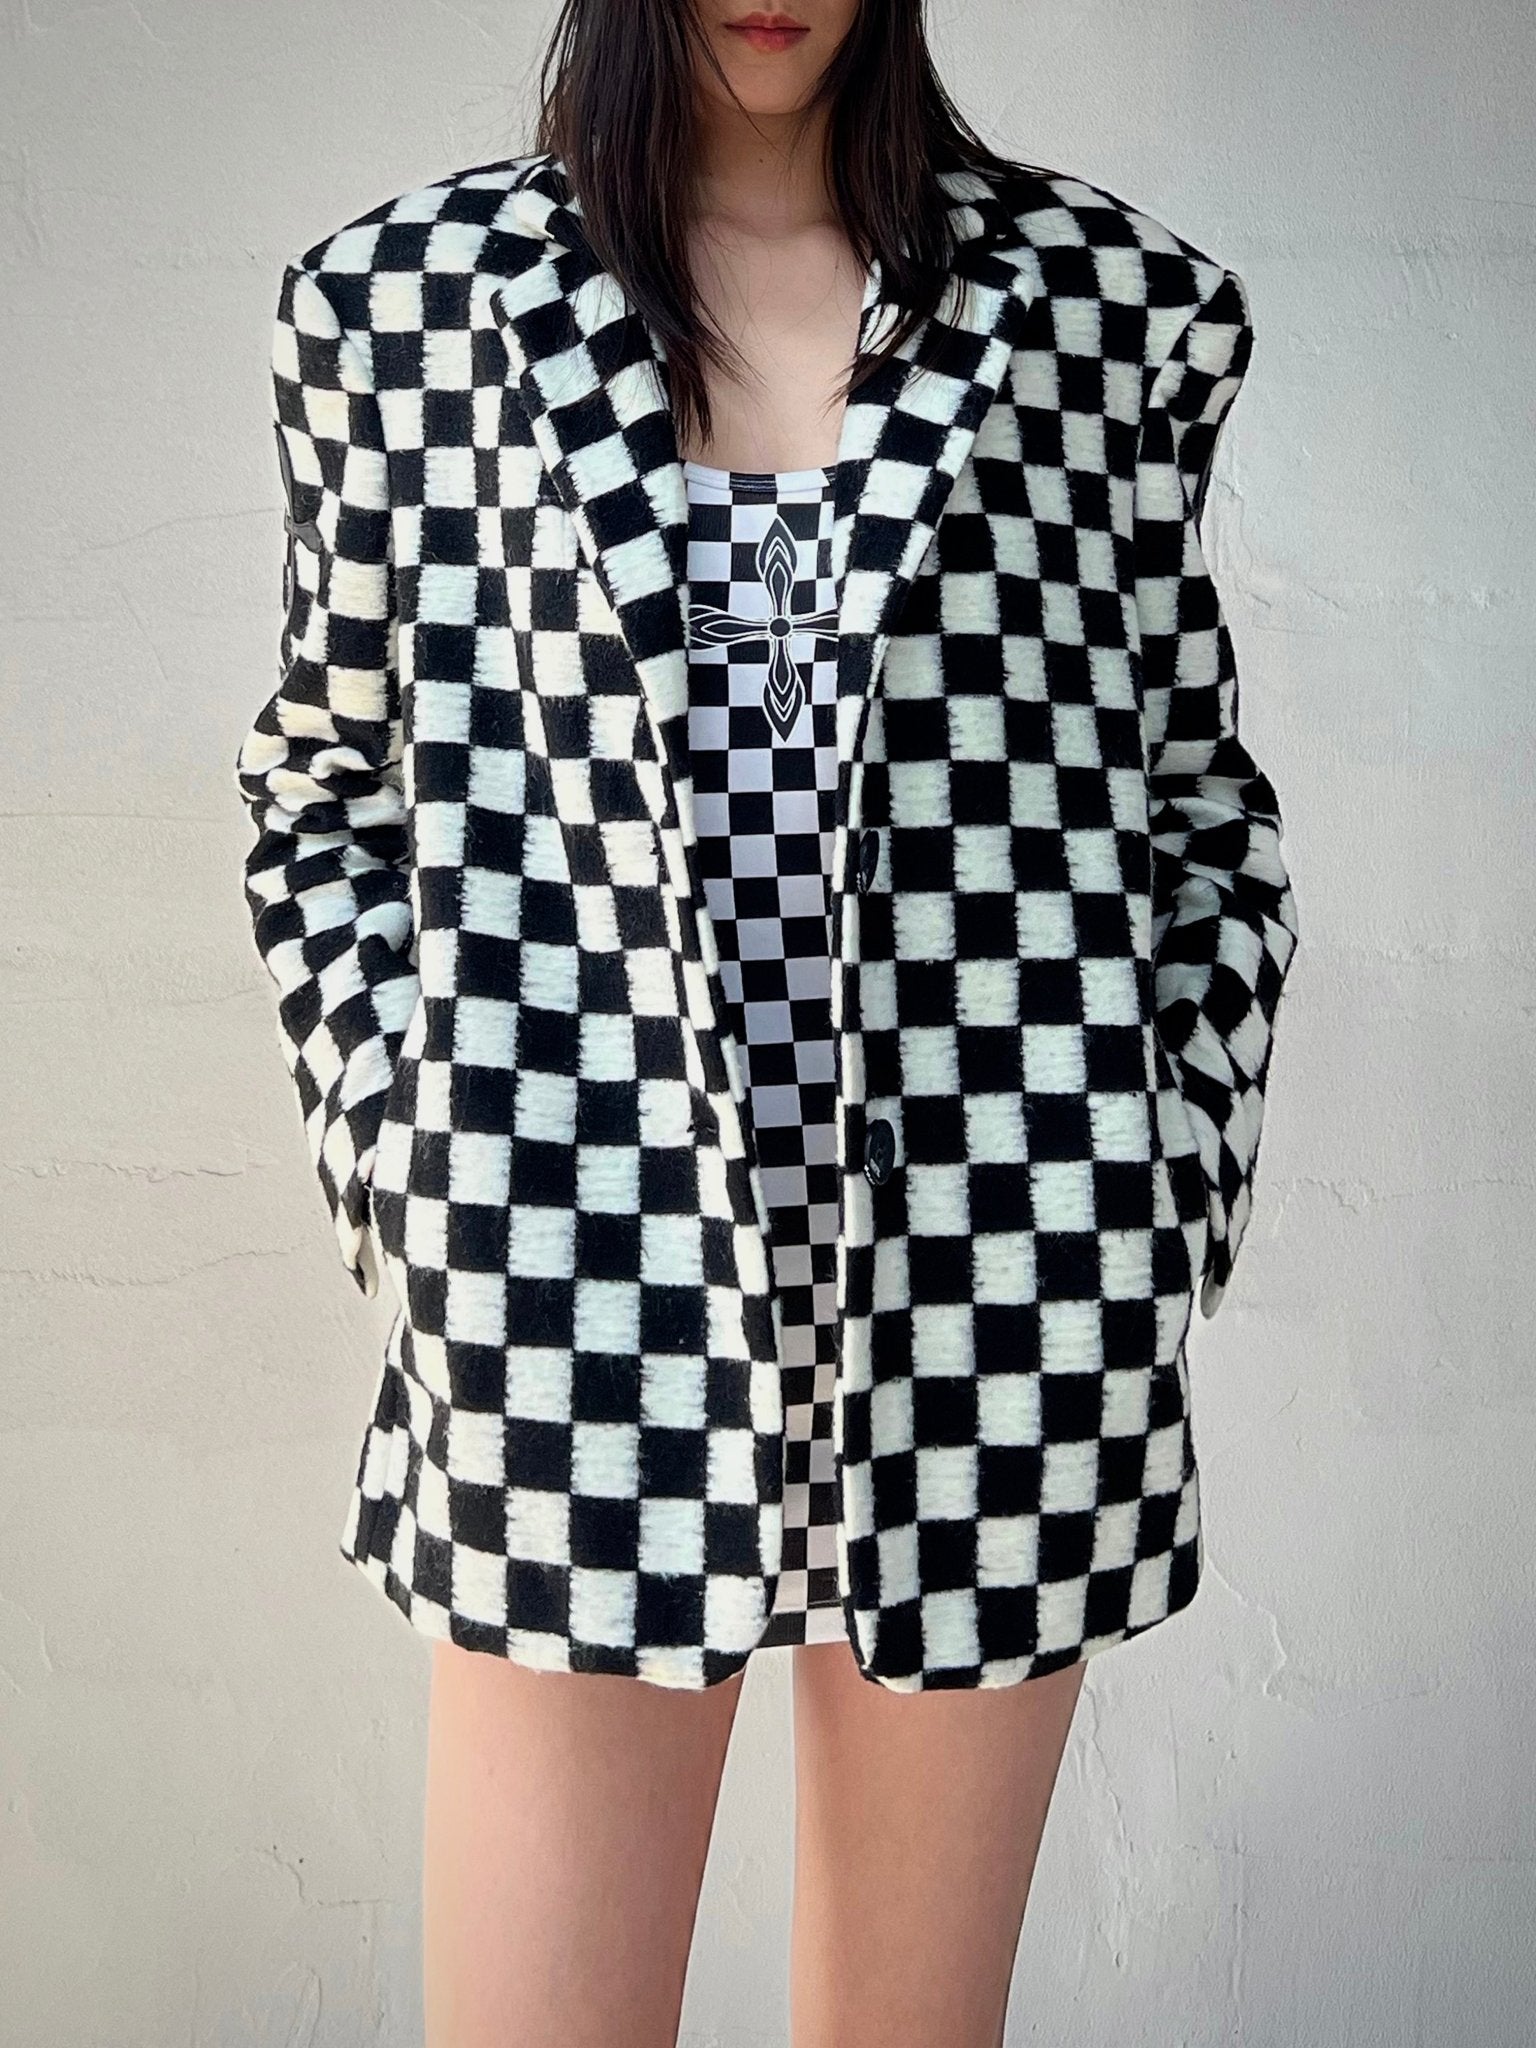 SMFK Black And White Grid Suit | MADA IN CHINA